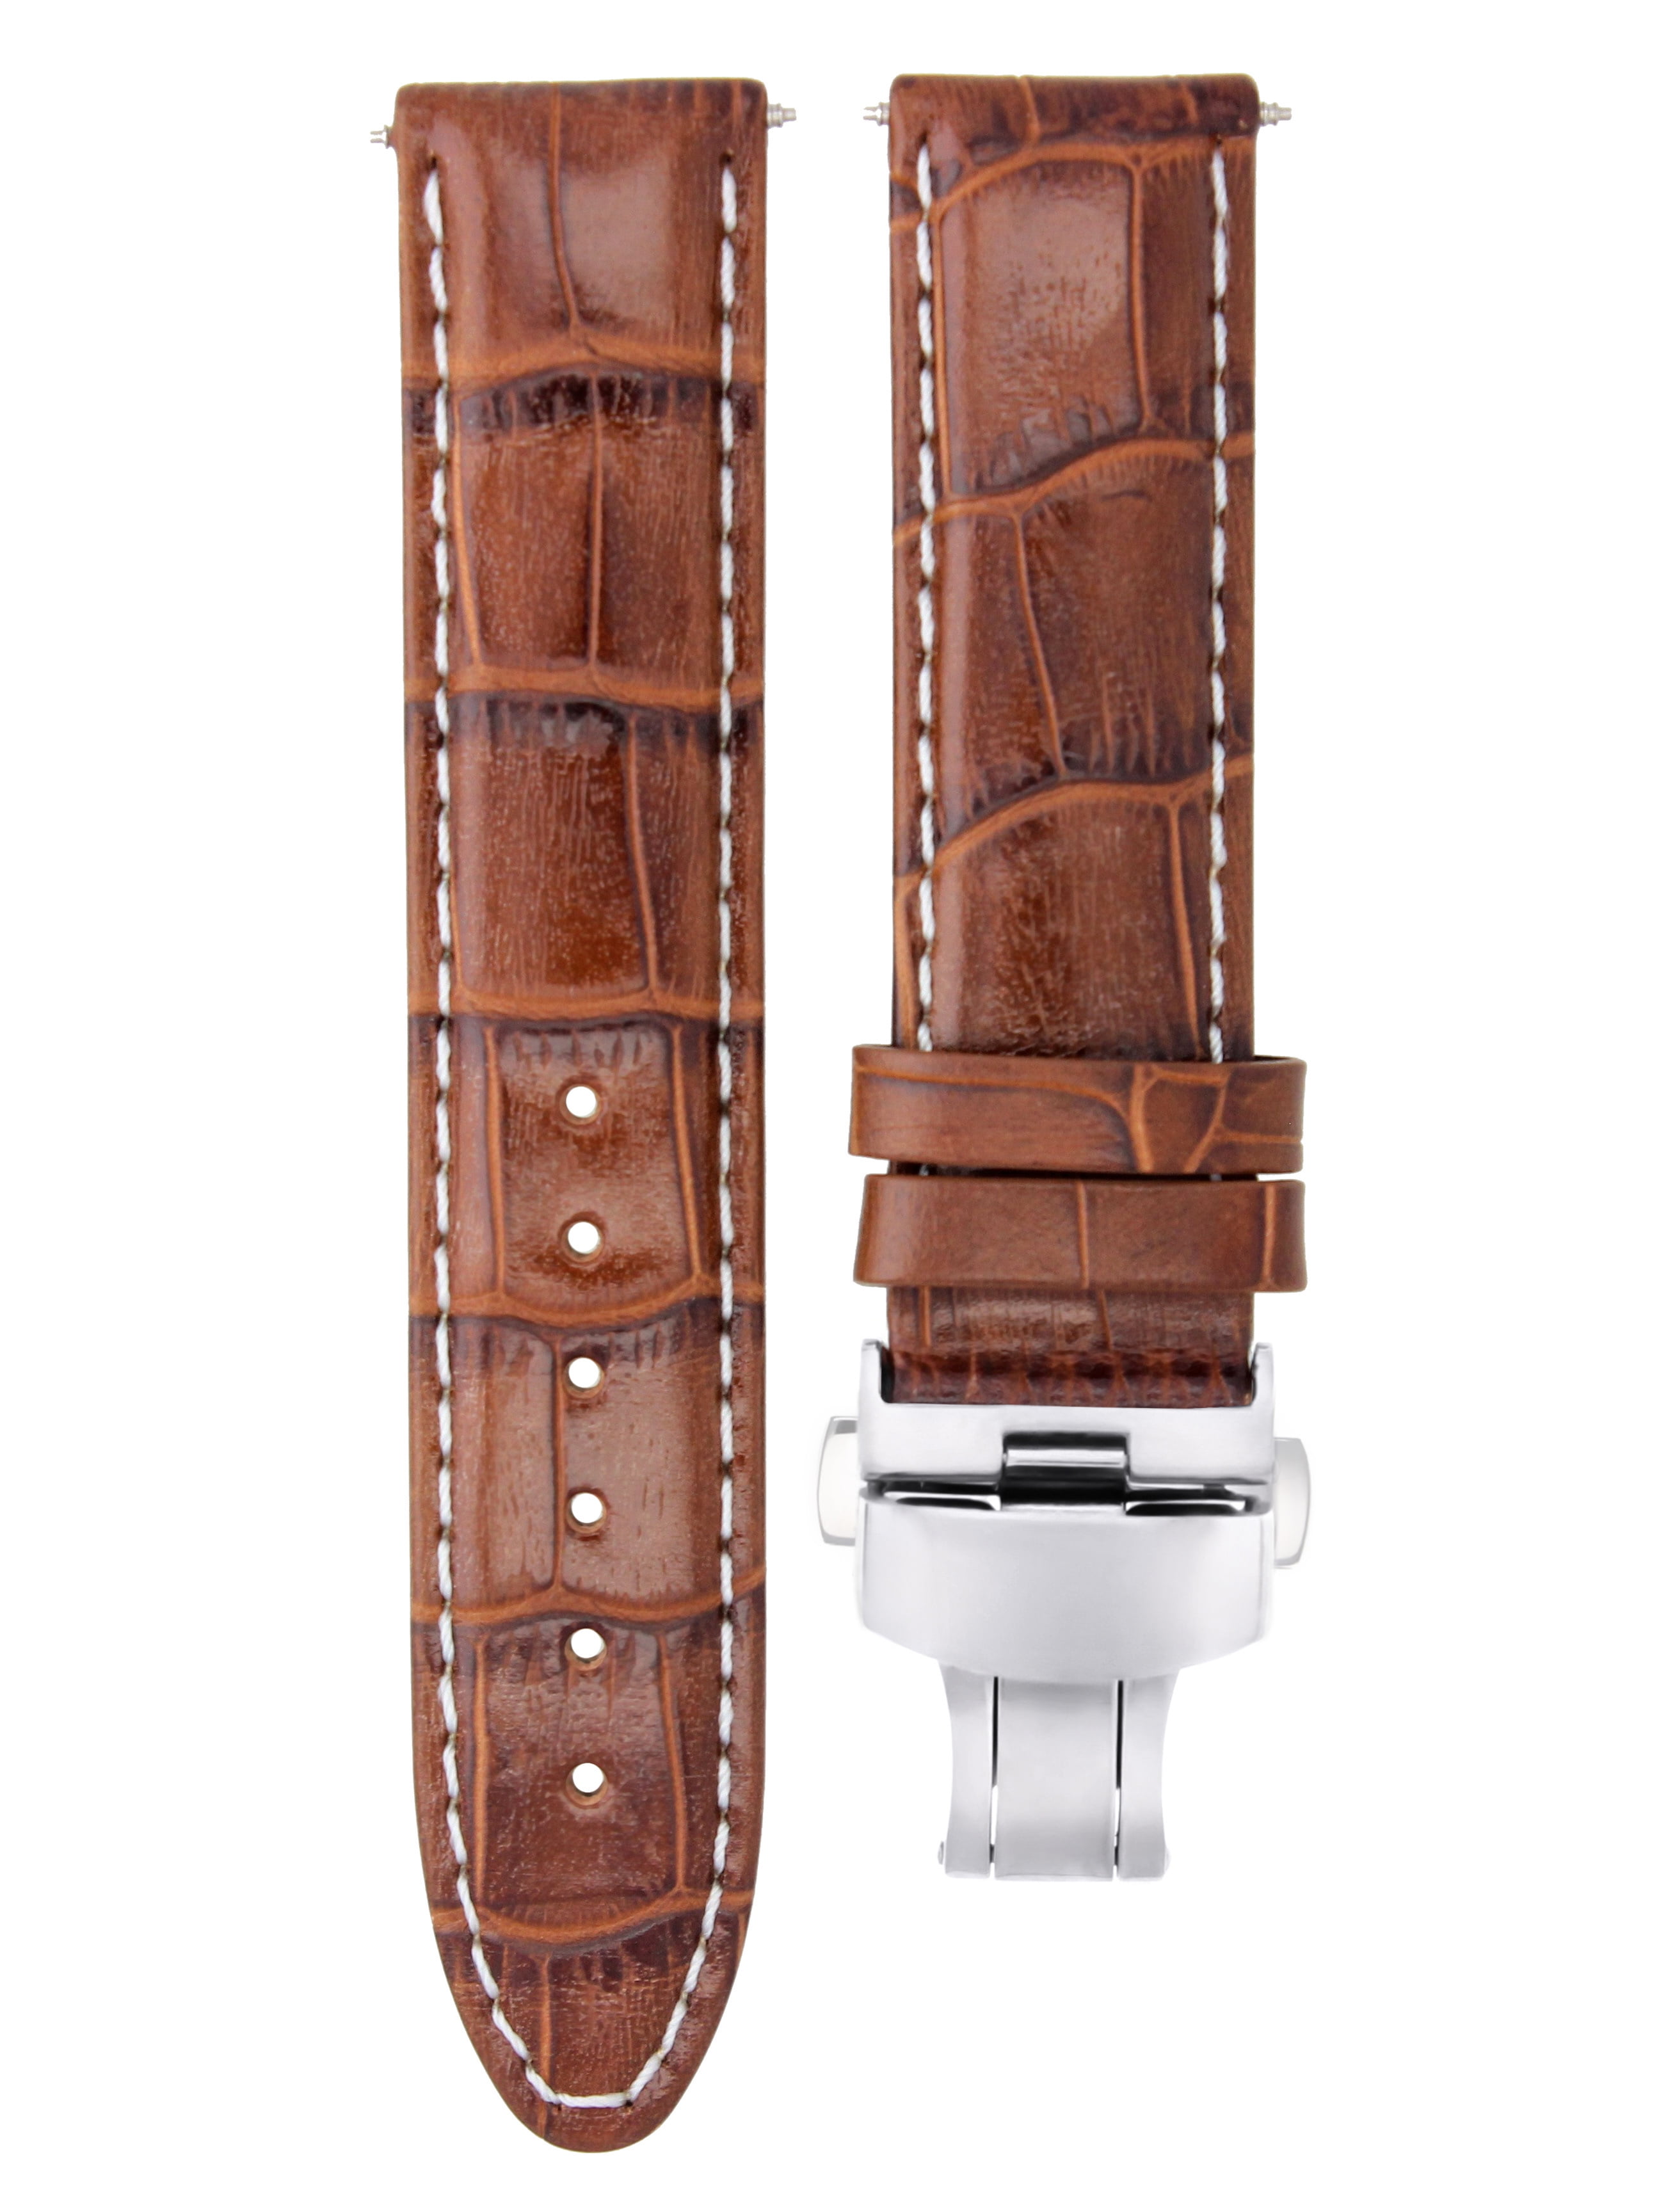 22MM LEATHER WATCH STRAP BAND CLASP FOR CITIZEN ECO DRIVE BL5250 